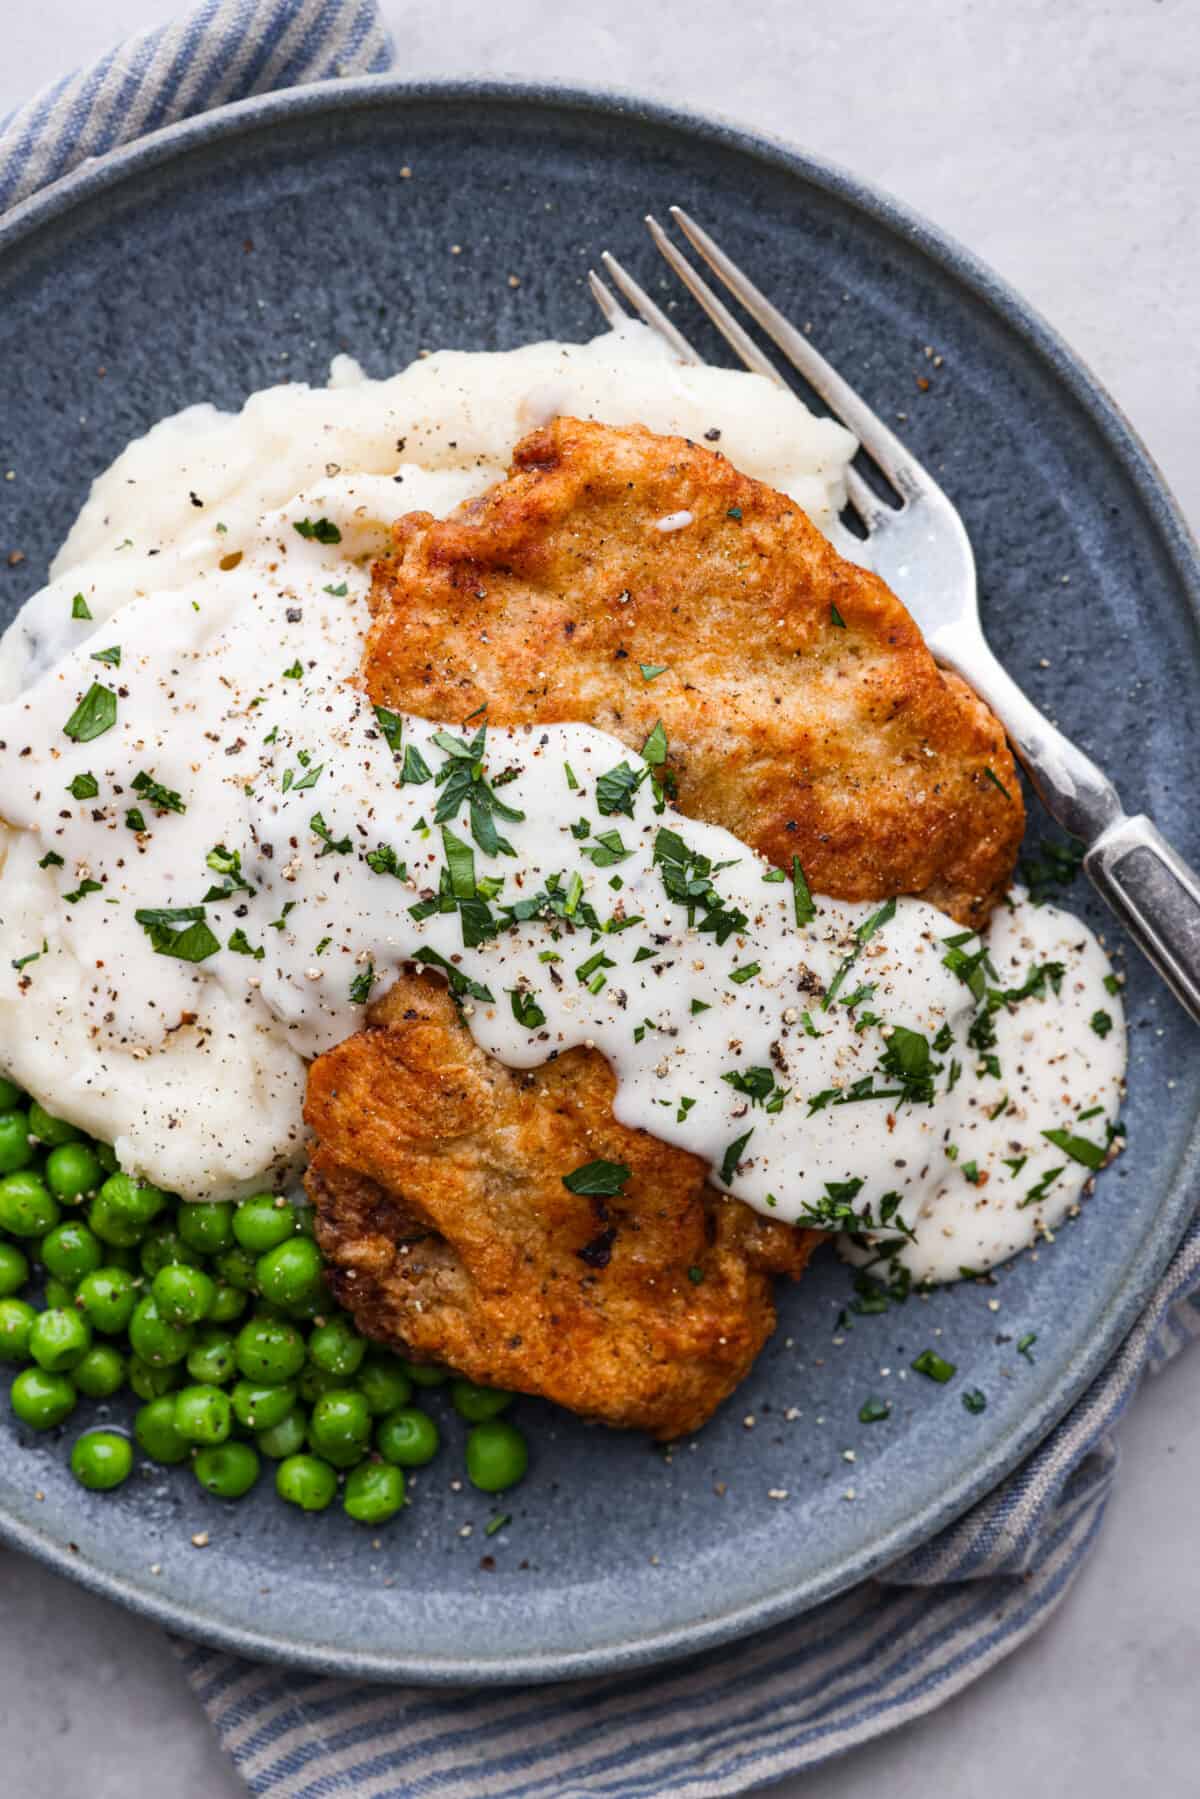 A chicken fried steak served with mashed potatoes, cream gravy, and peas.